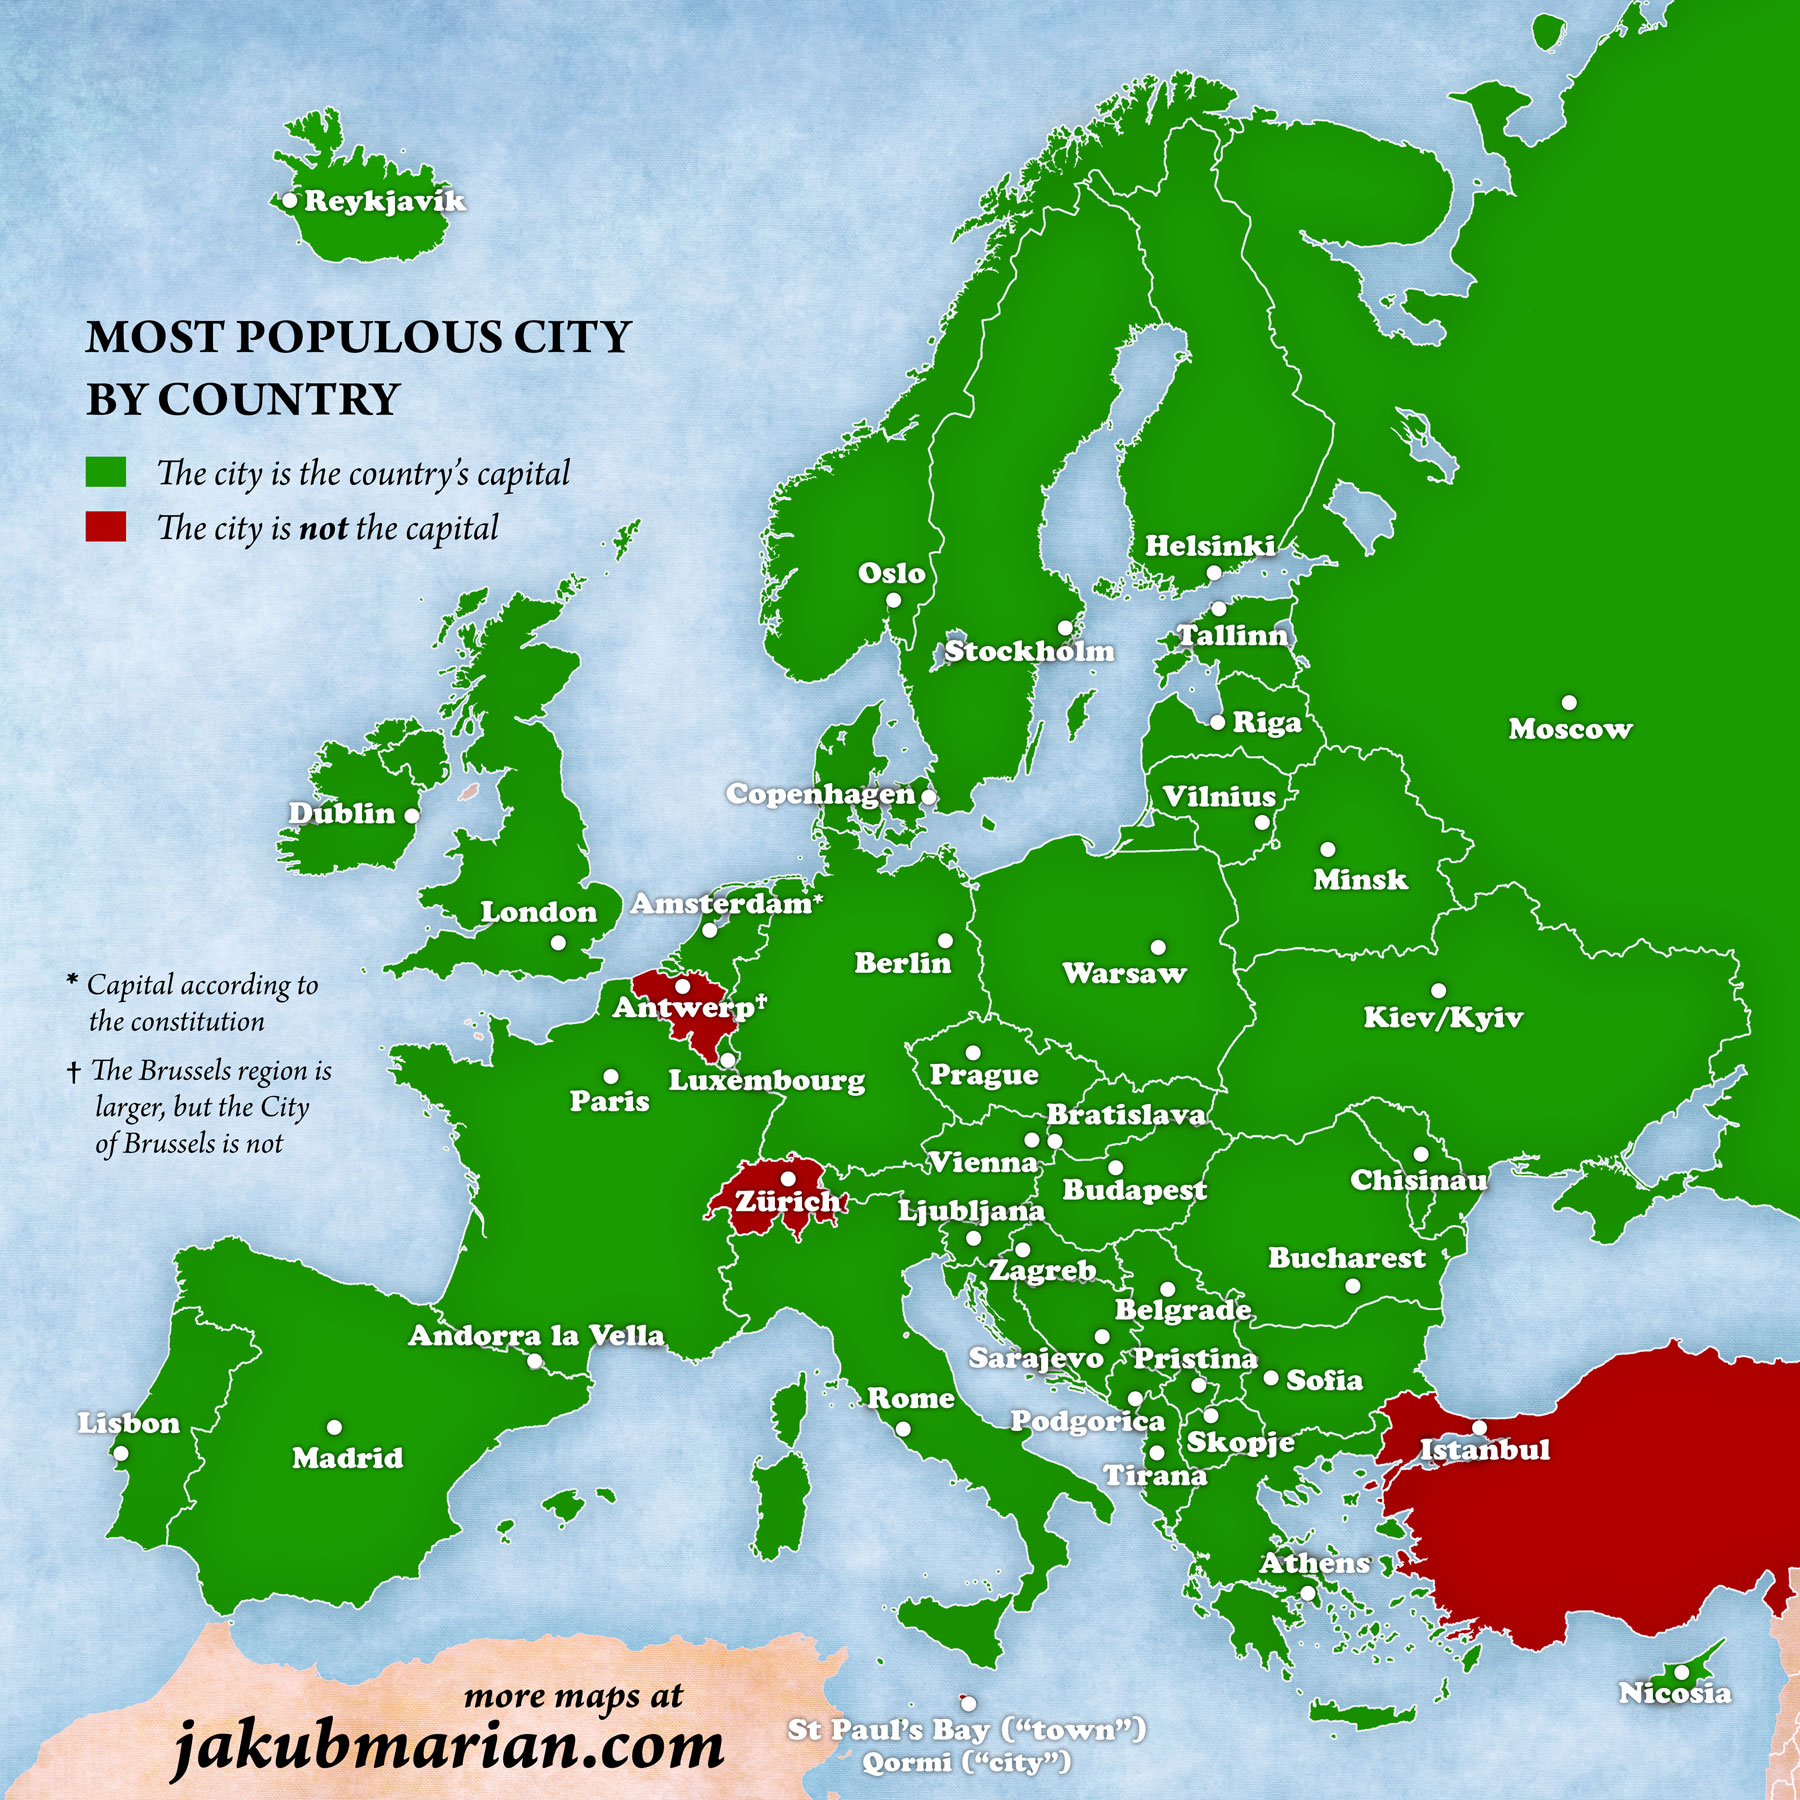 Largest cities of European countries